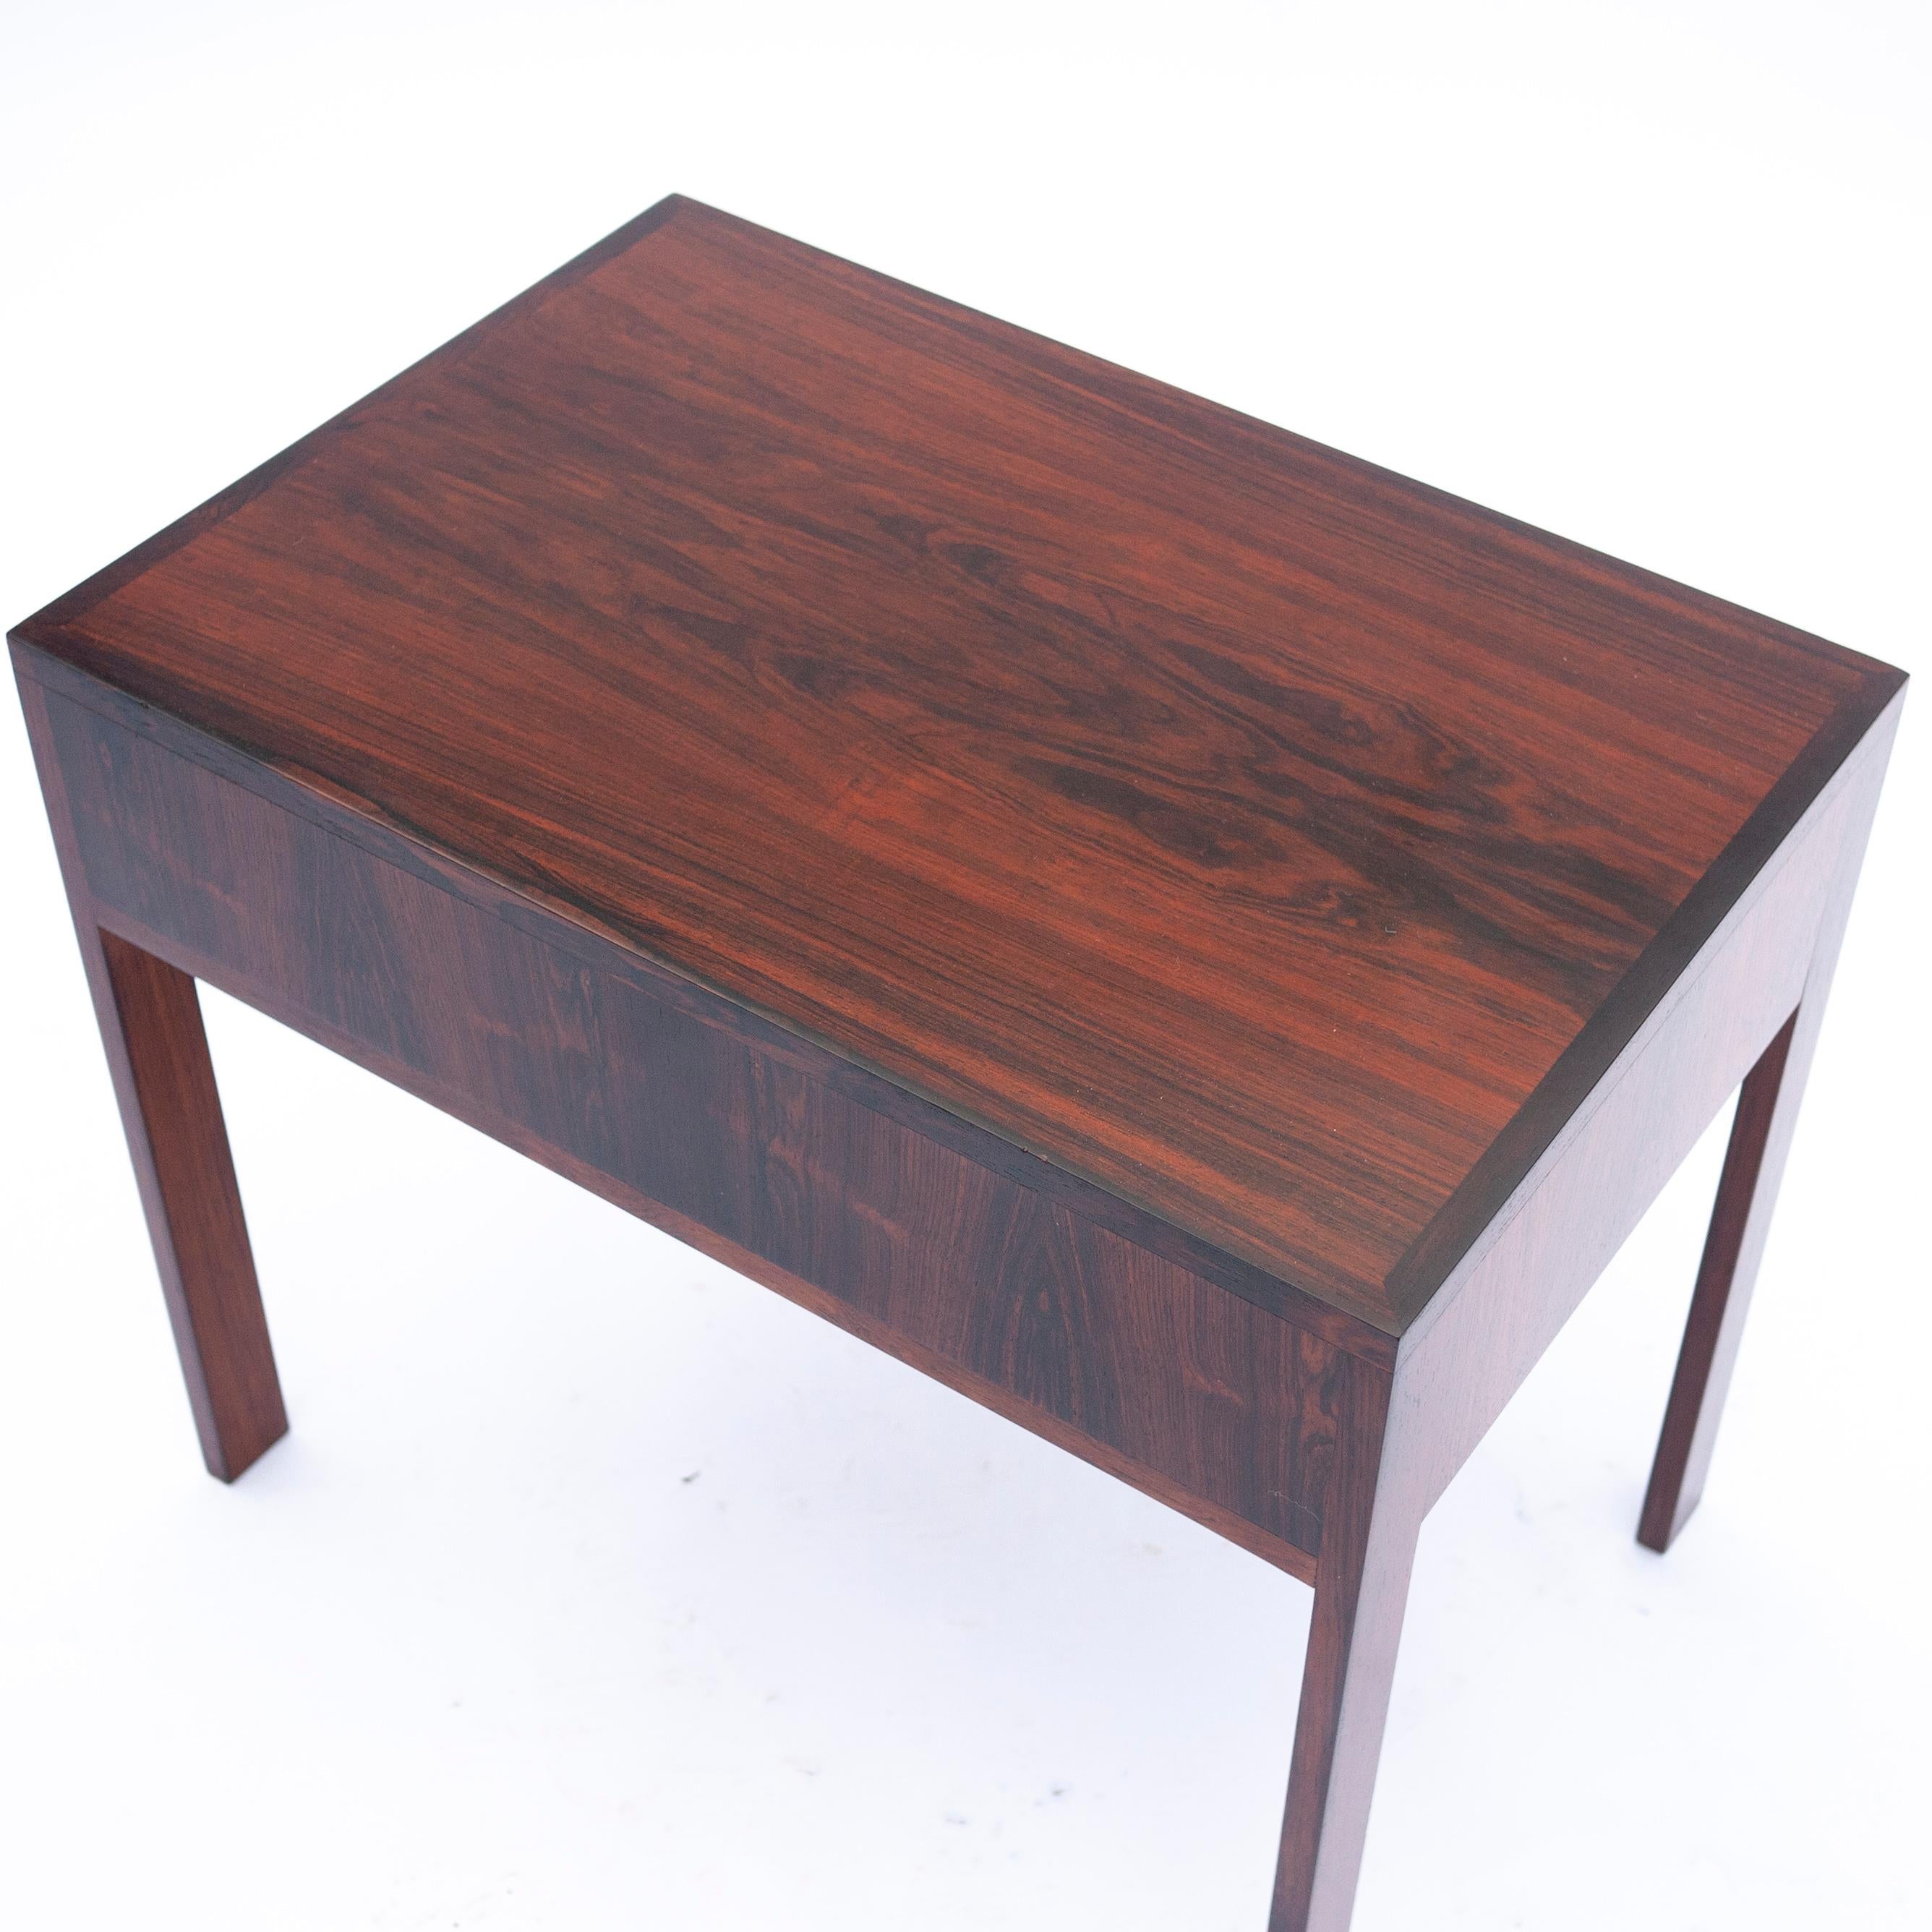 Scandinavian Nesting Tables and Side Table in Rosewood by Illum Wikkelsø, 1960s For Sale 1